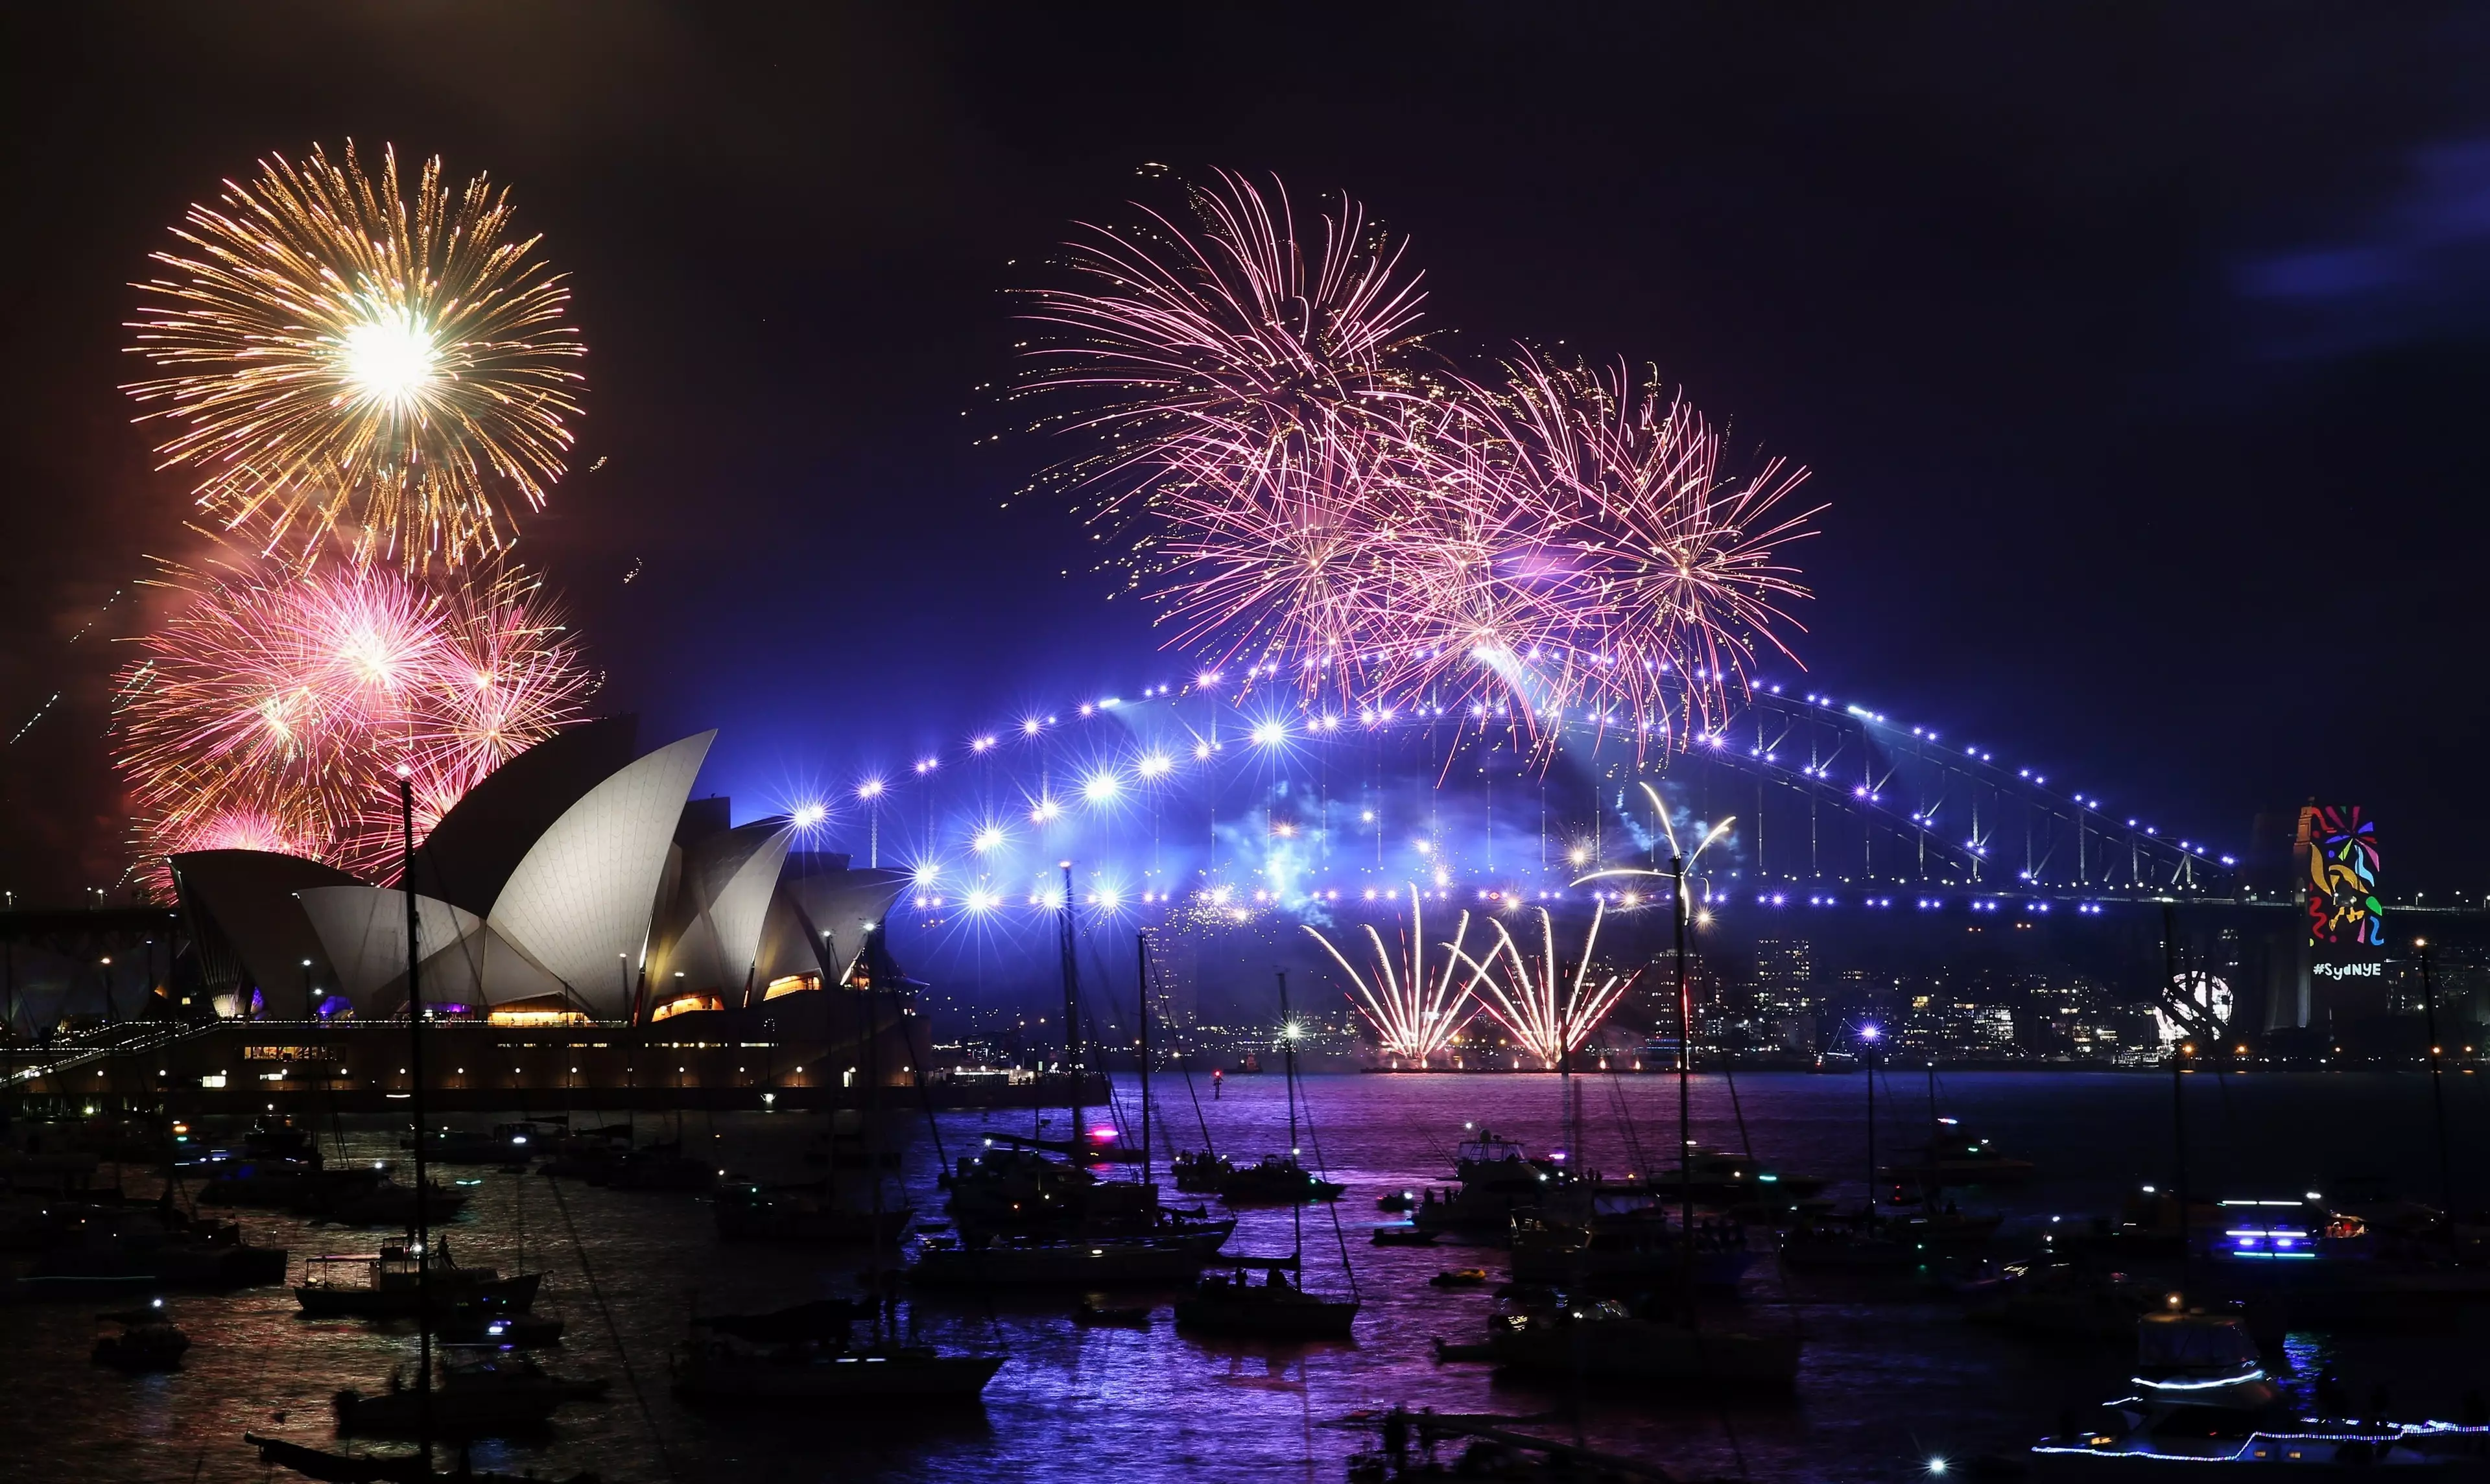 Sydney is one of the first major cities in the world to see in the New Year.